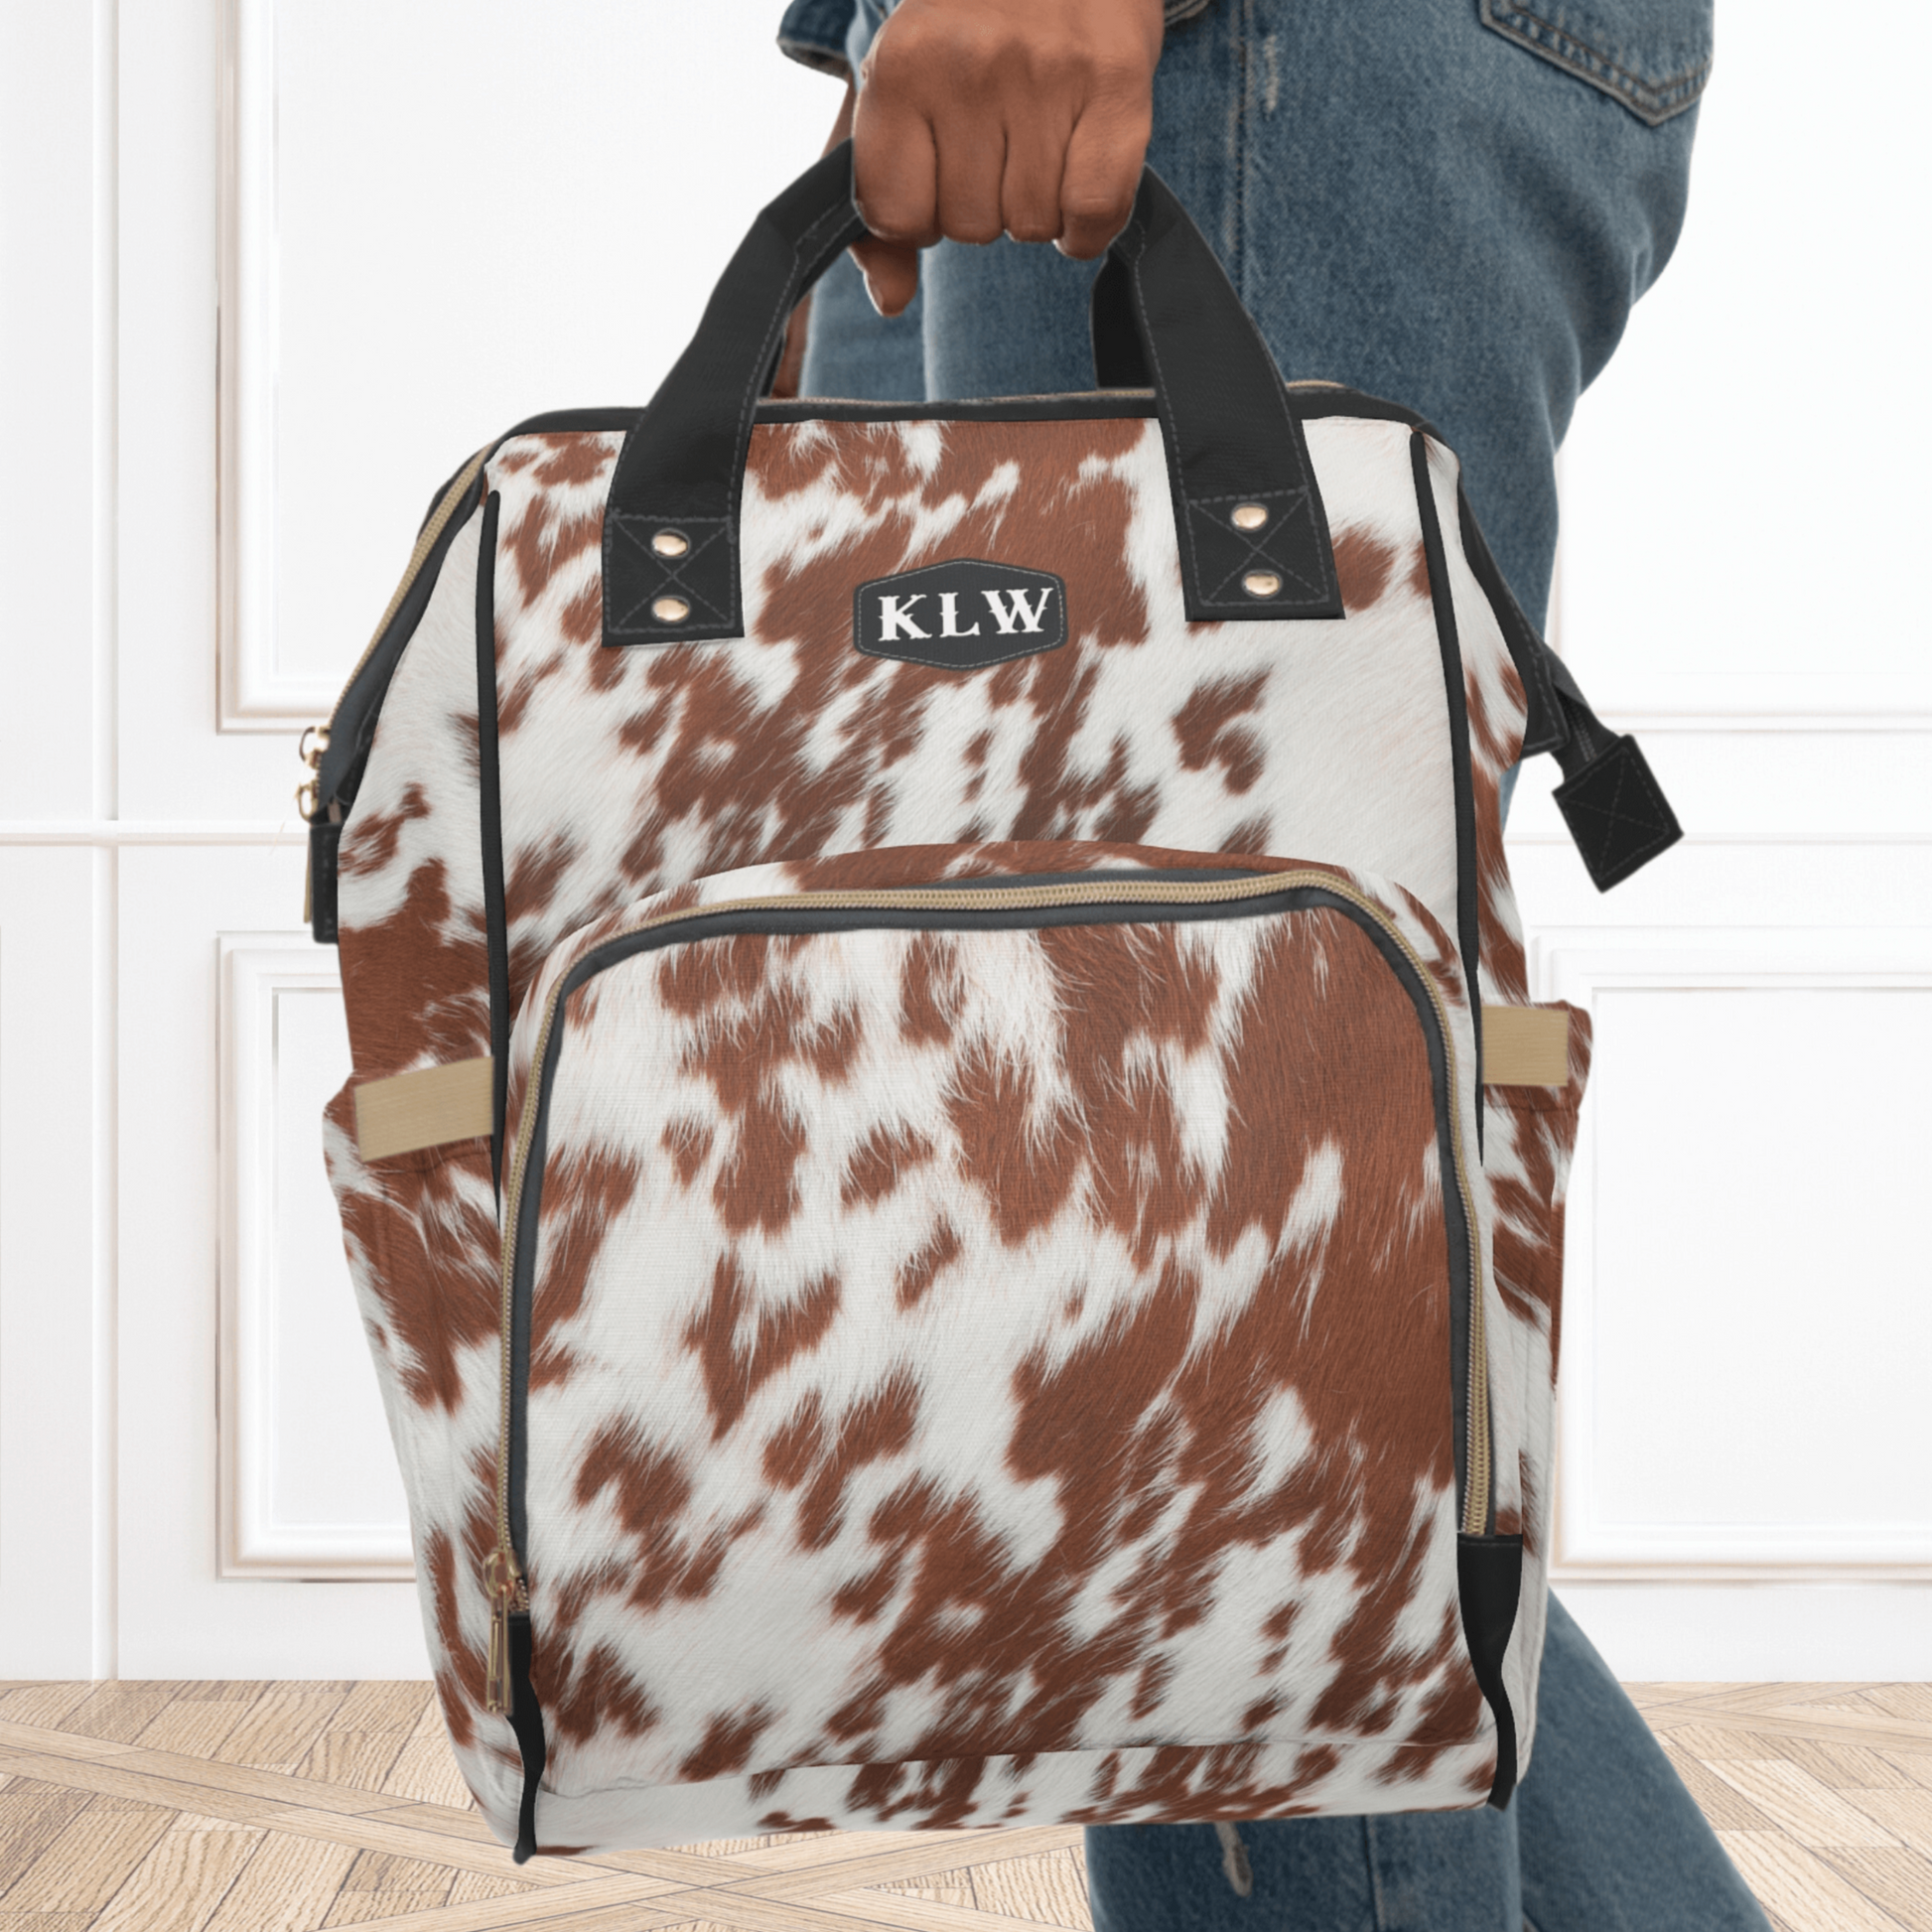 This western diaper bag backpack can be carried with the handles and makes the perfect baby shower gift for mom. The cowhide is a print on canvas and can be easily washed.